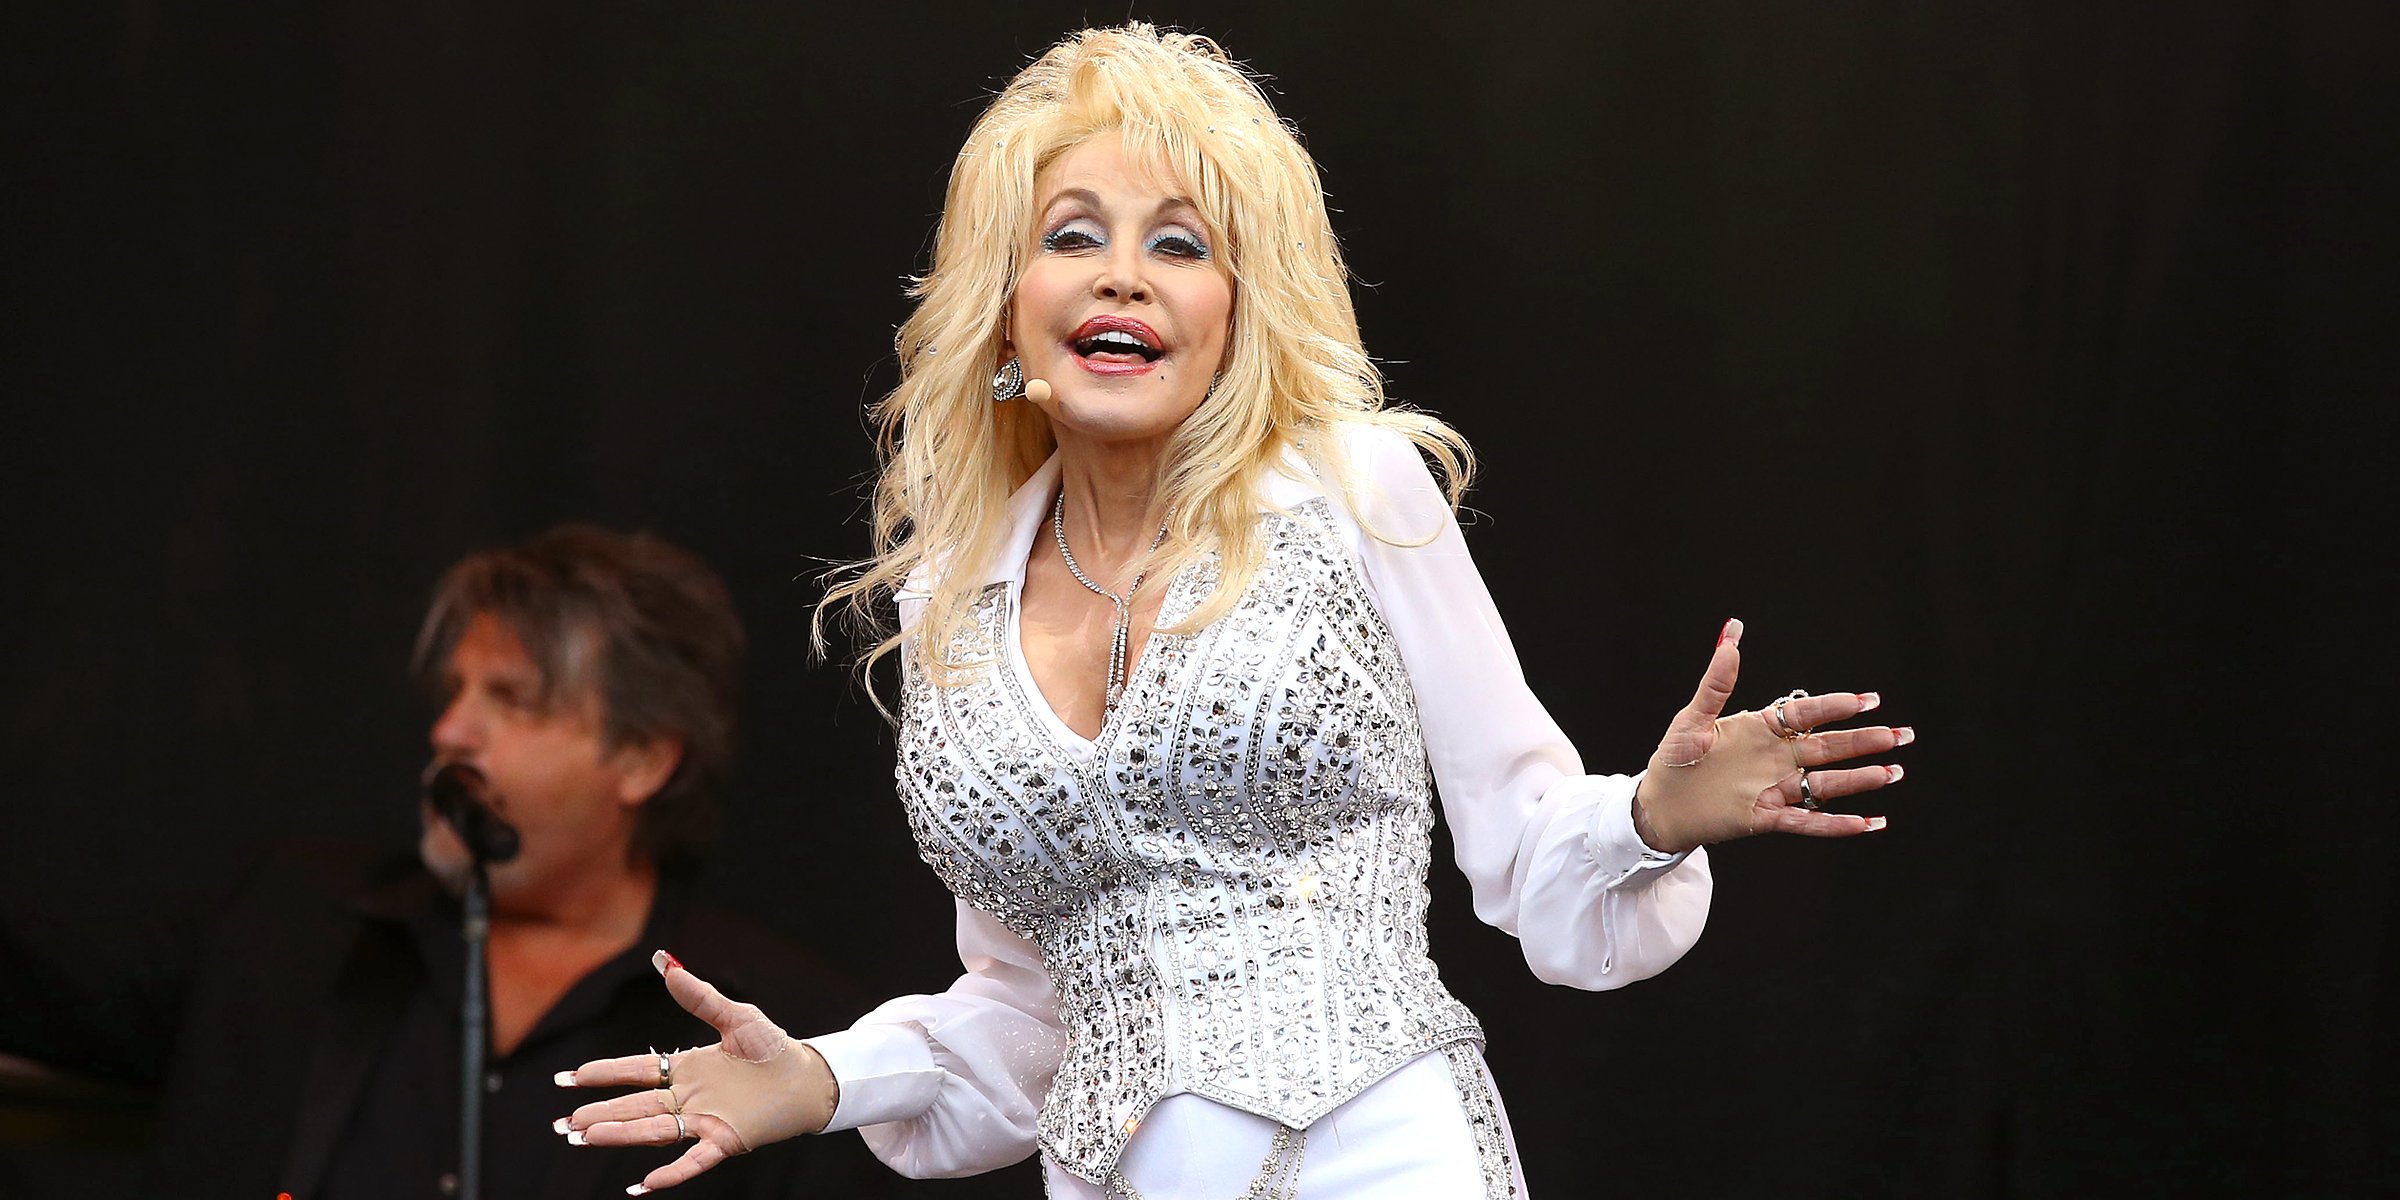 Dolly Parton┃Quelle: twitter.com/DollyParton ┃ Getty Images